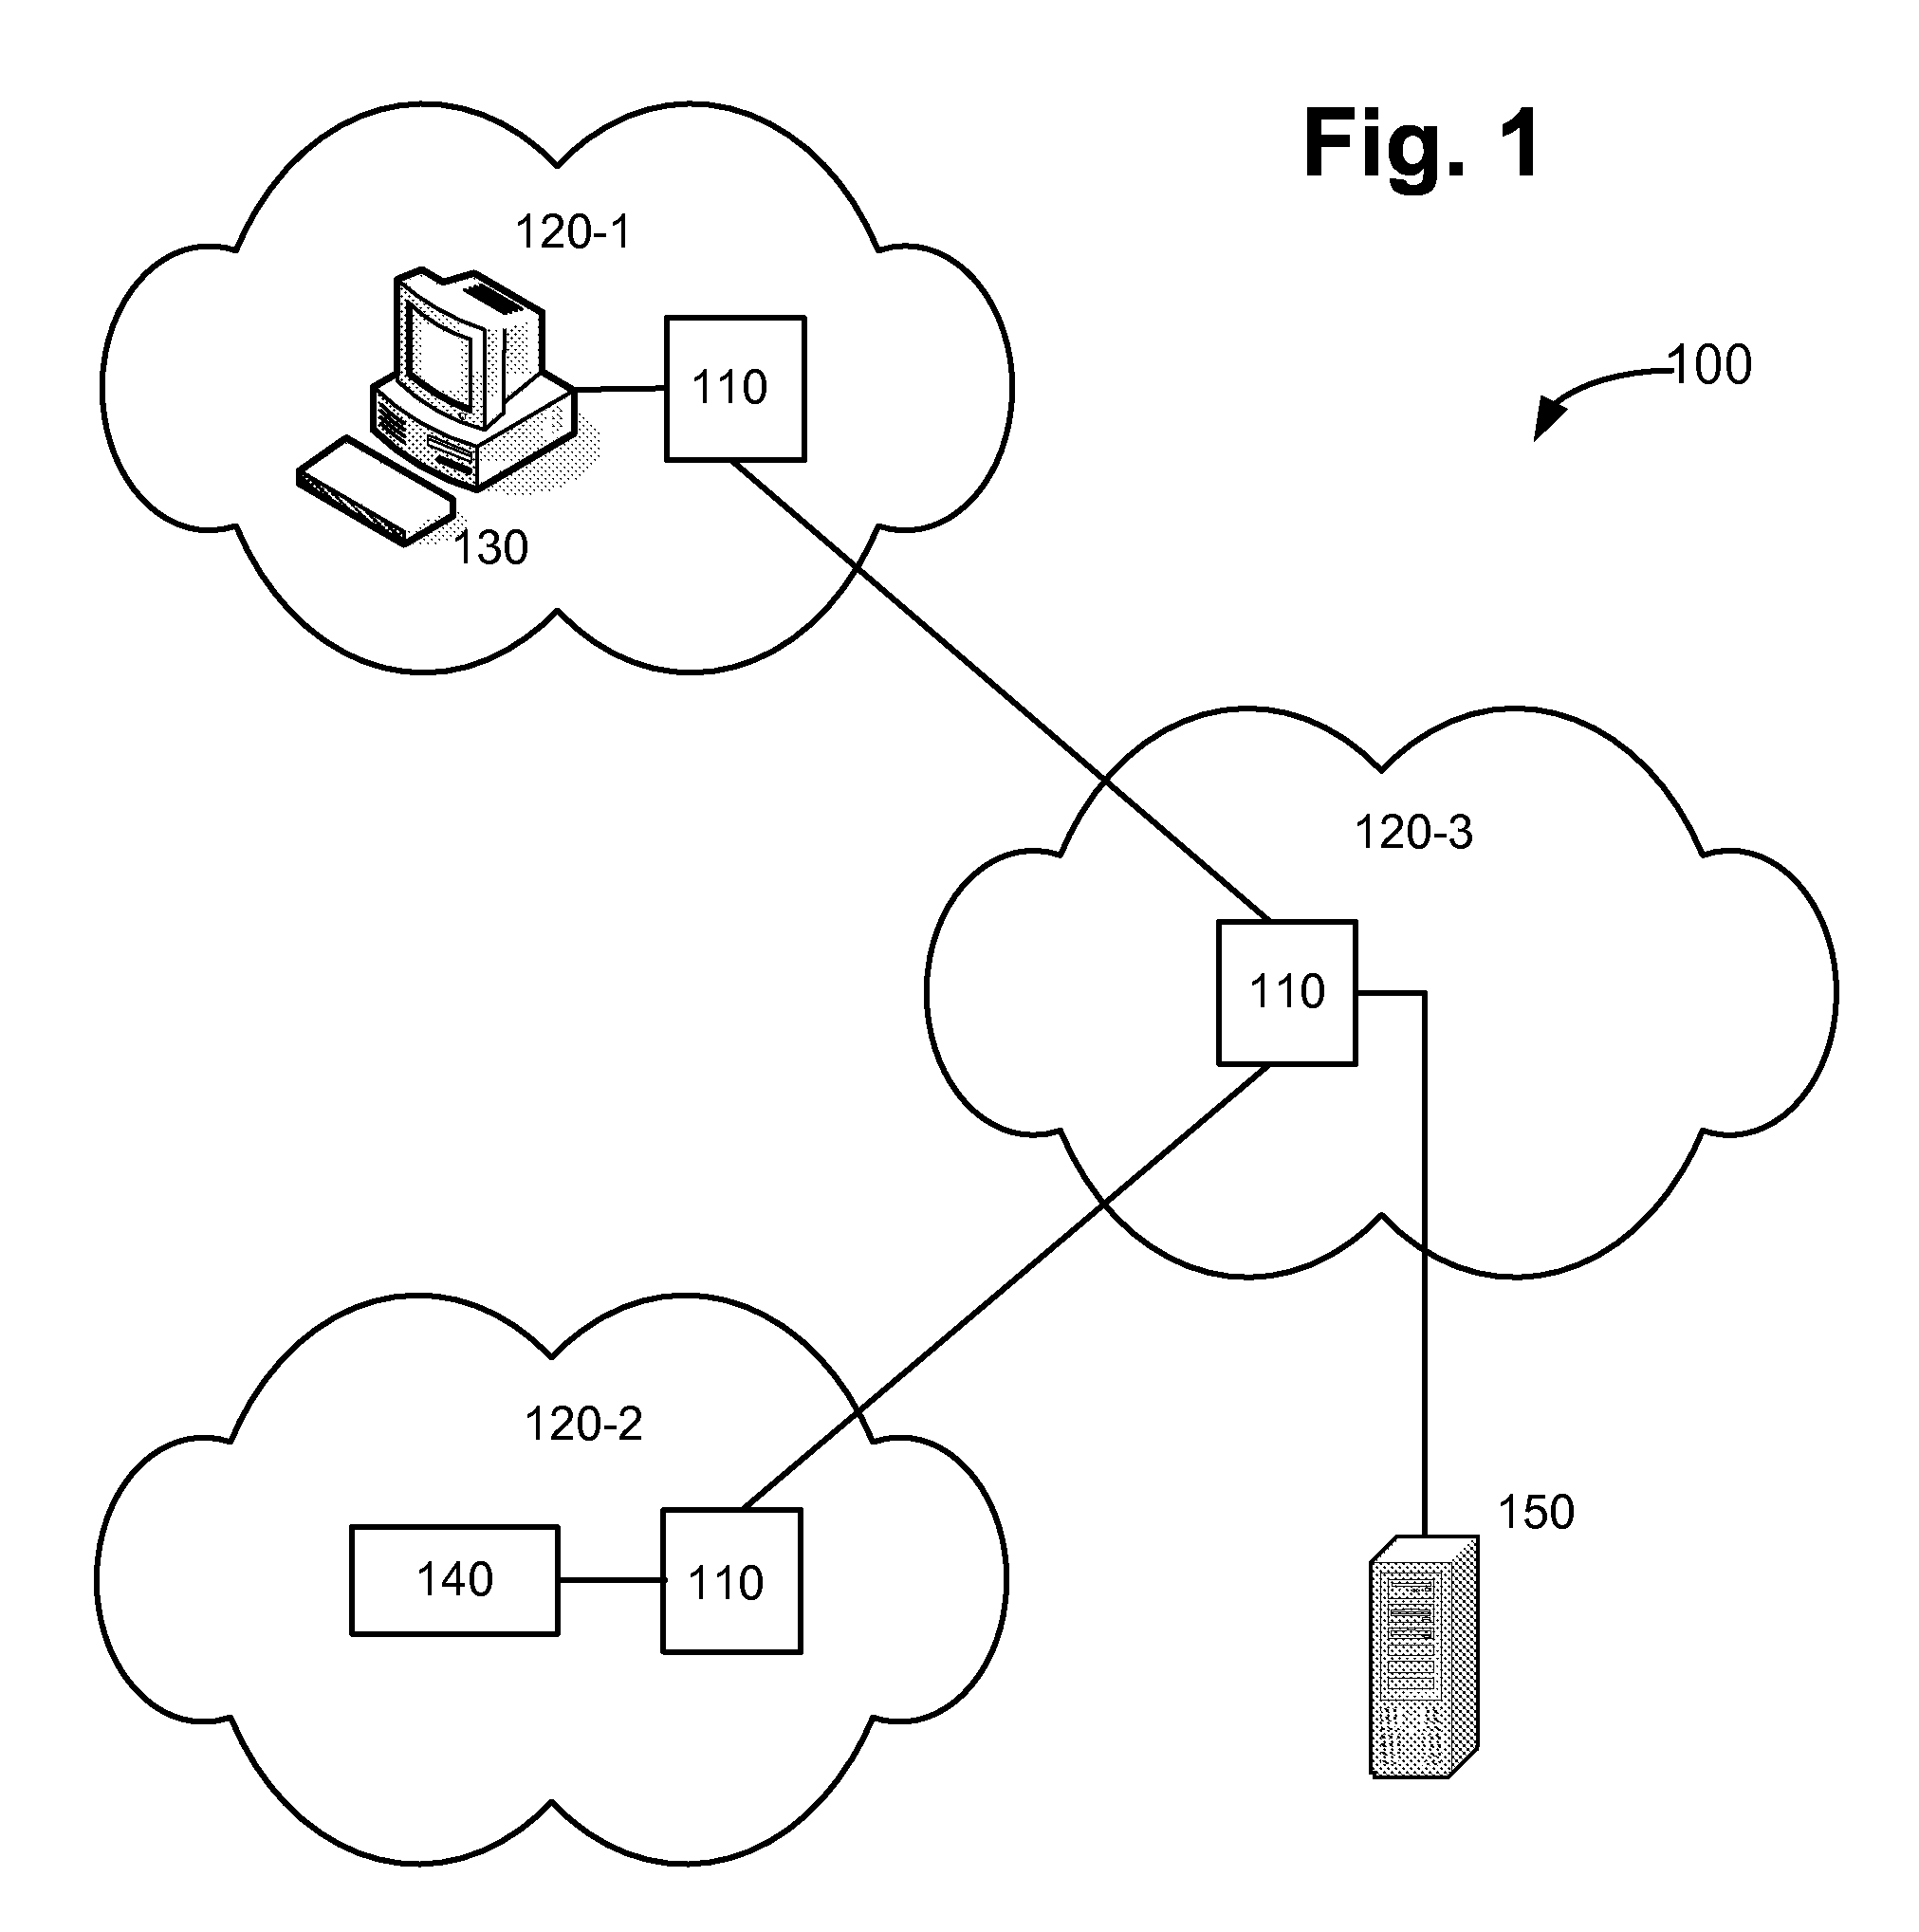 Systems and methods for data streaming